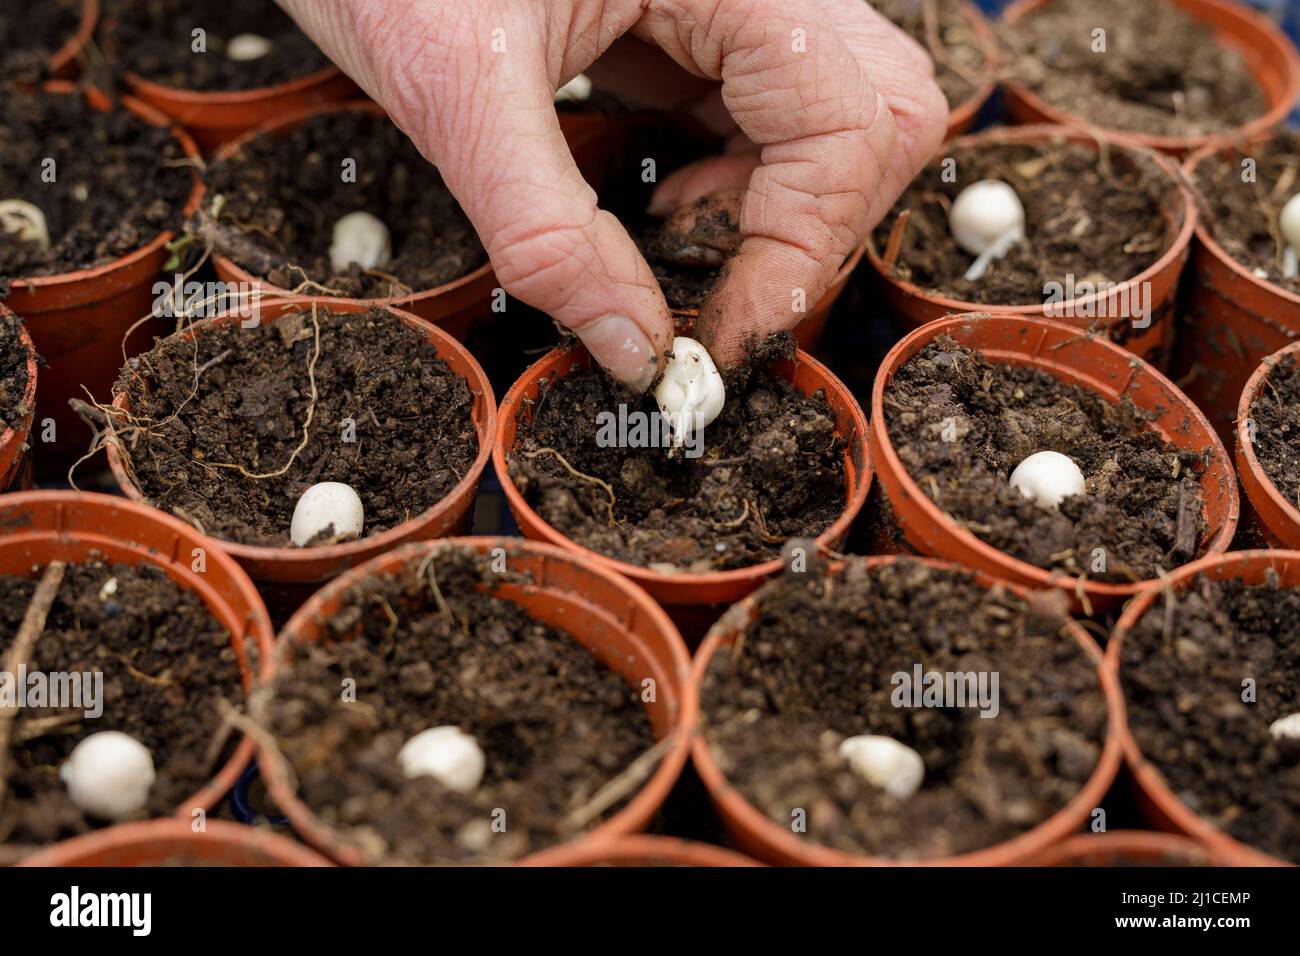 Welsh pea seeds being planted in plant pots Stock Photo